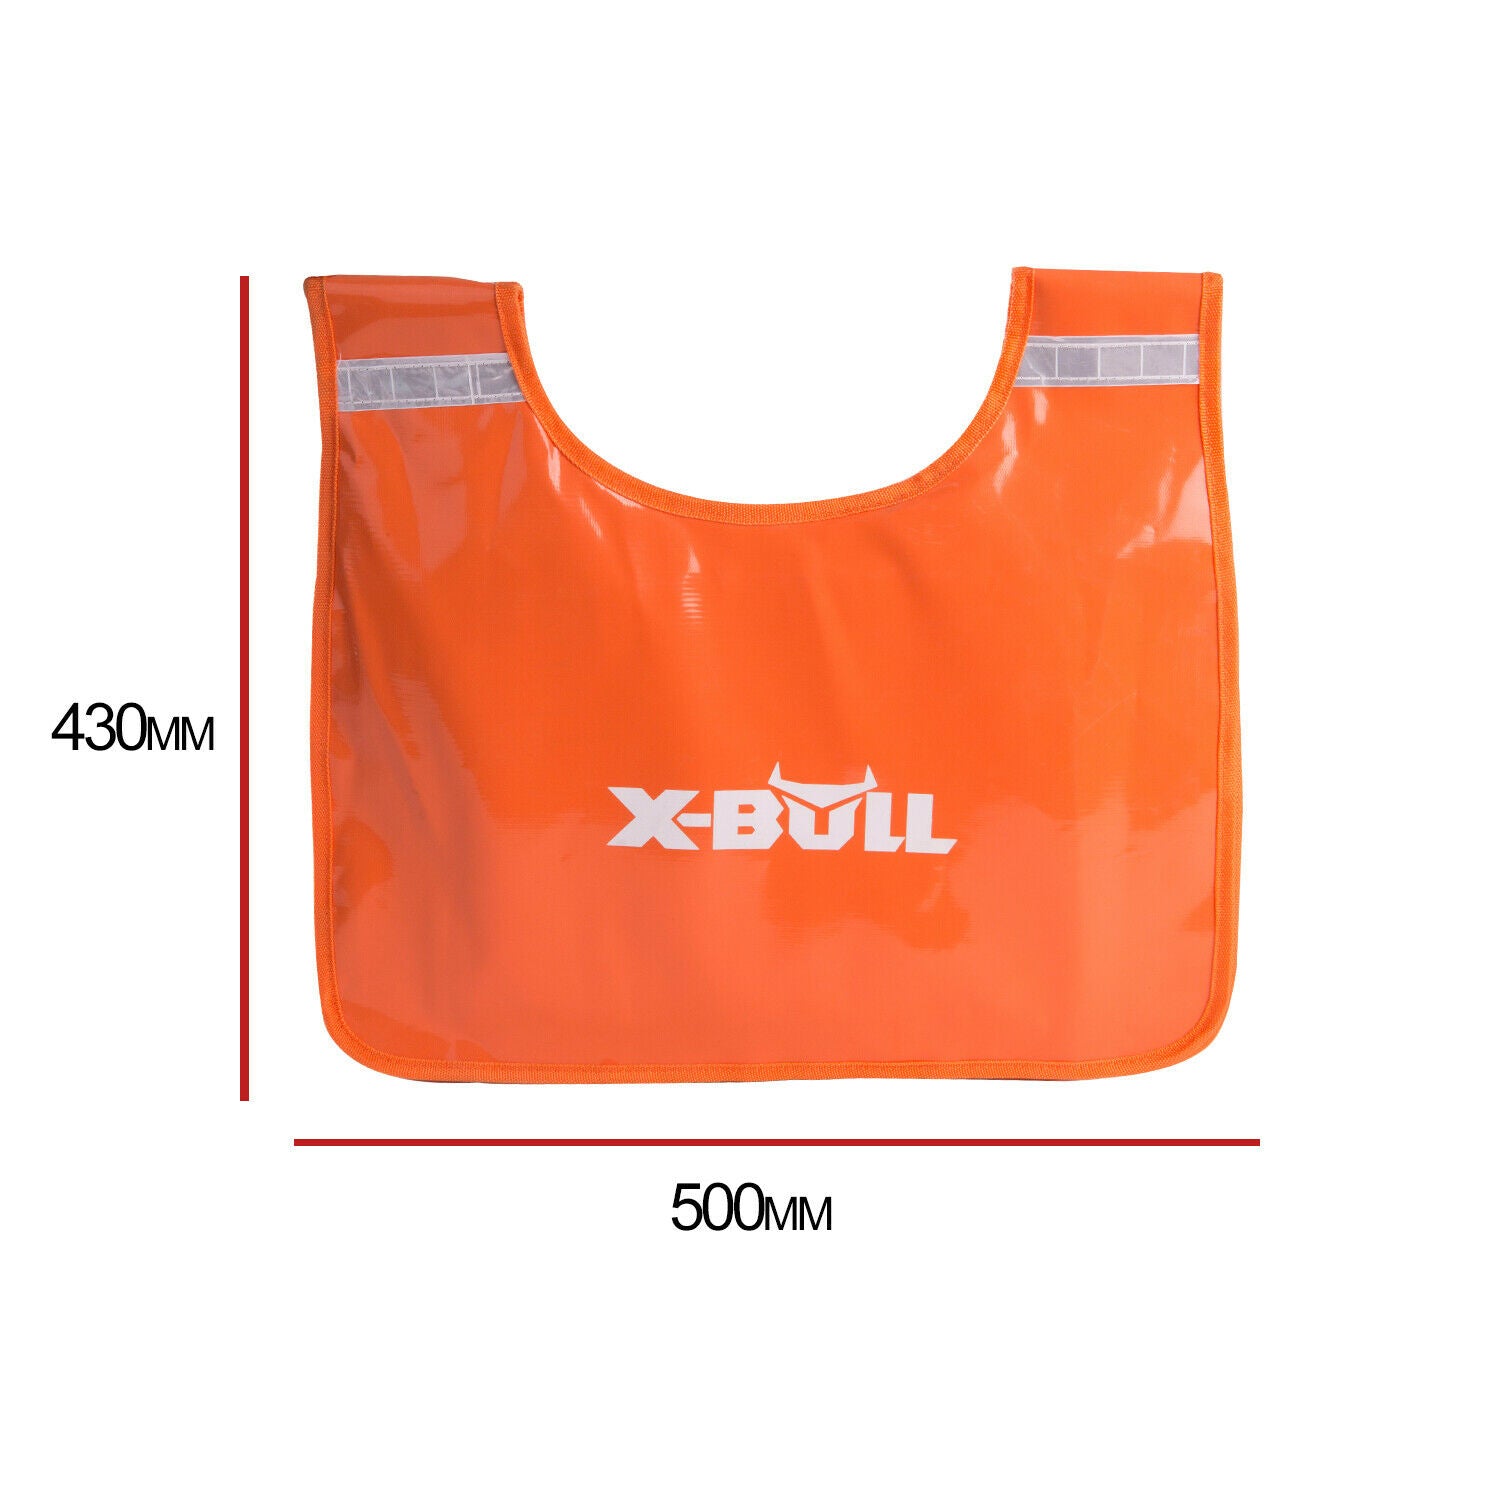 x-bull-winch-damper-cable-cushion-recovery-safety-blanket-4x4-car-off-road